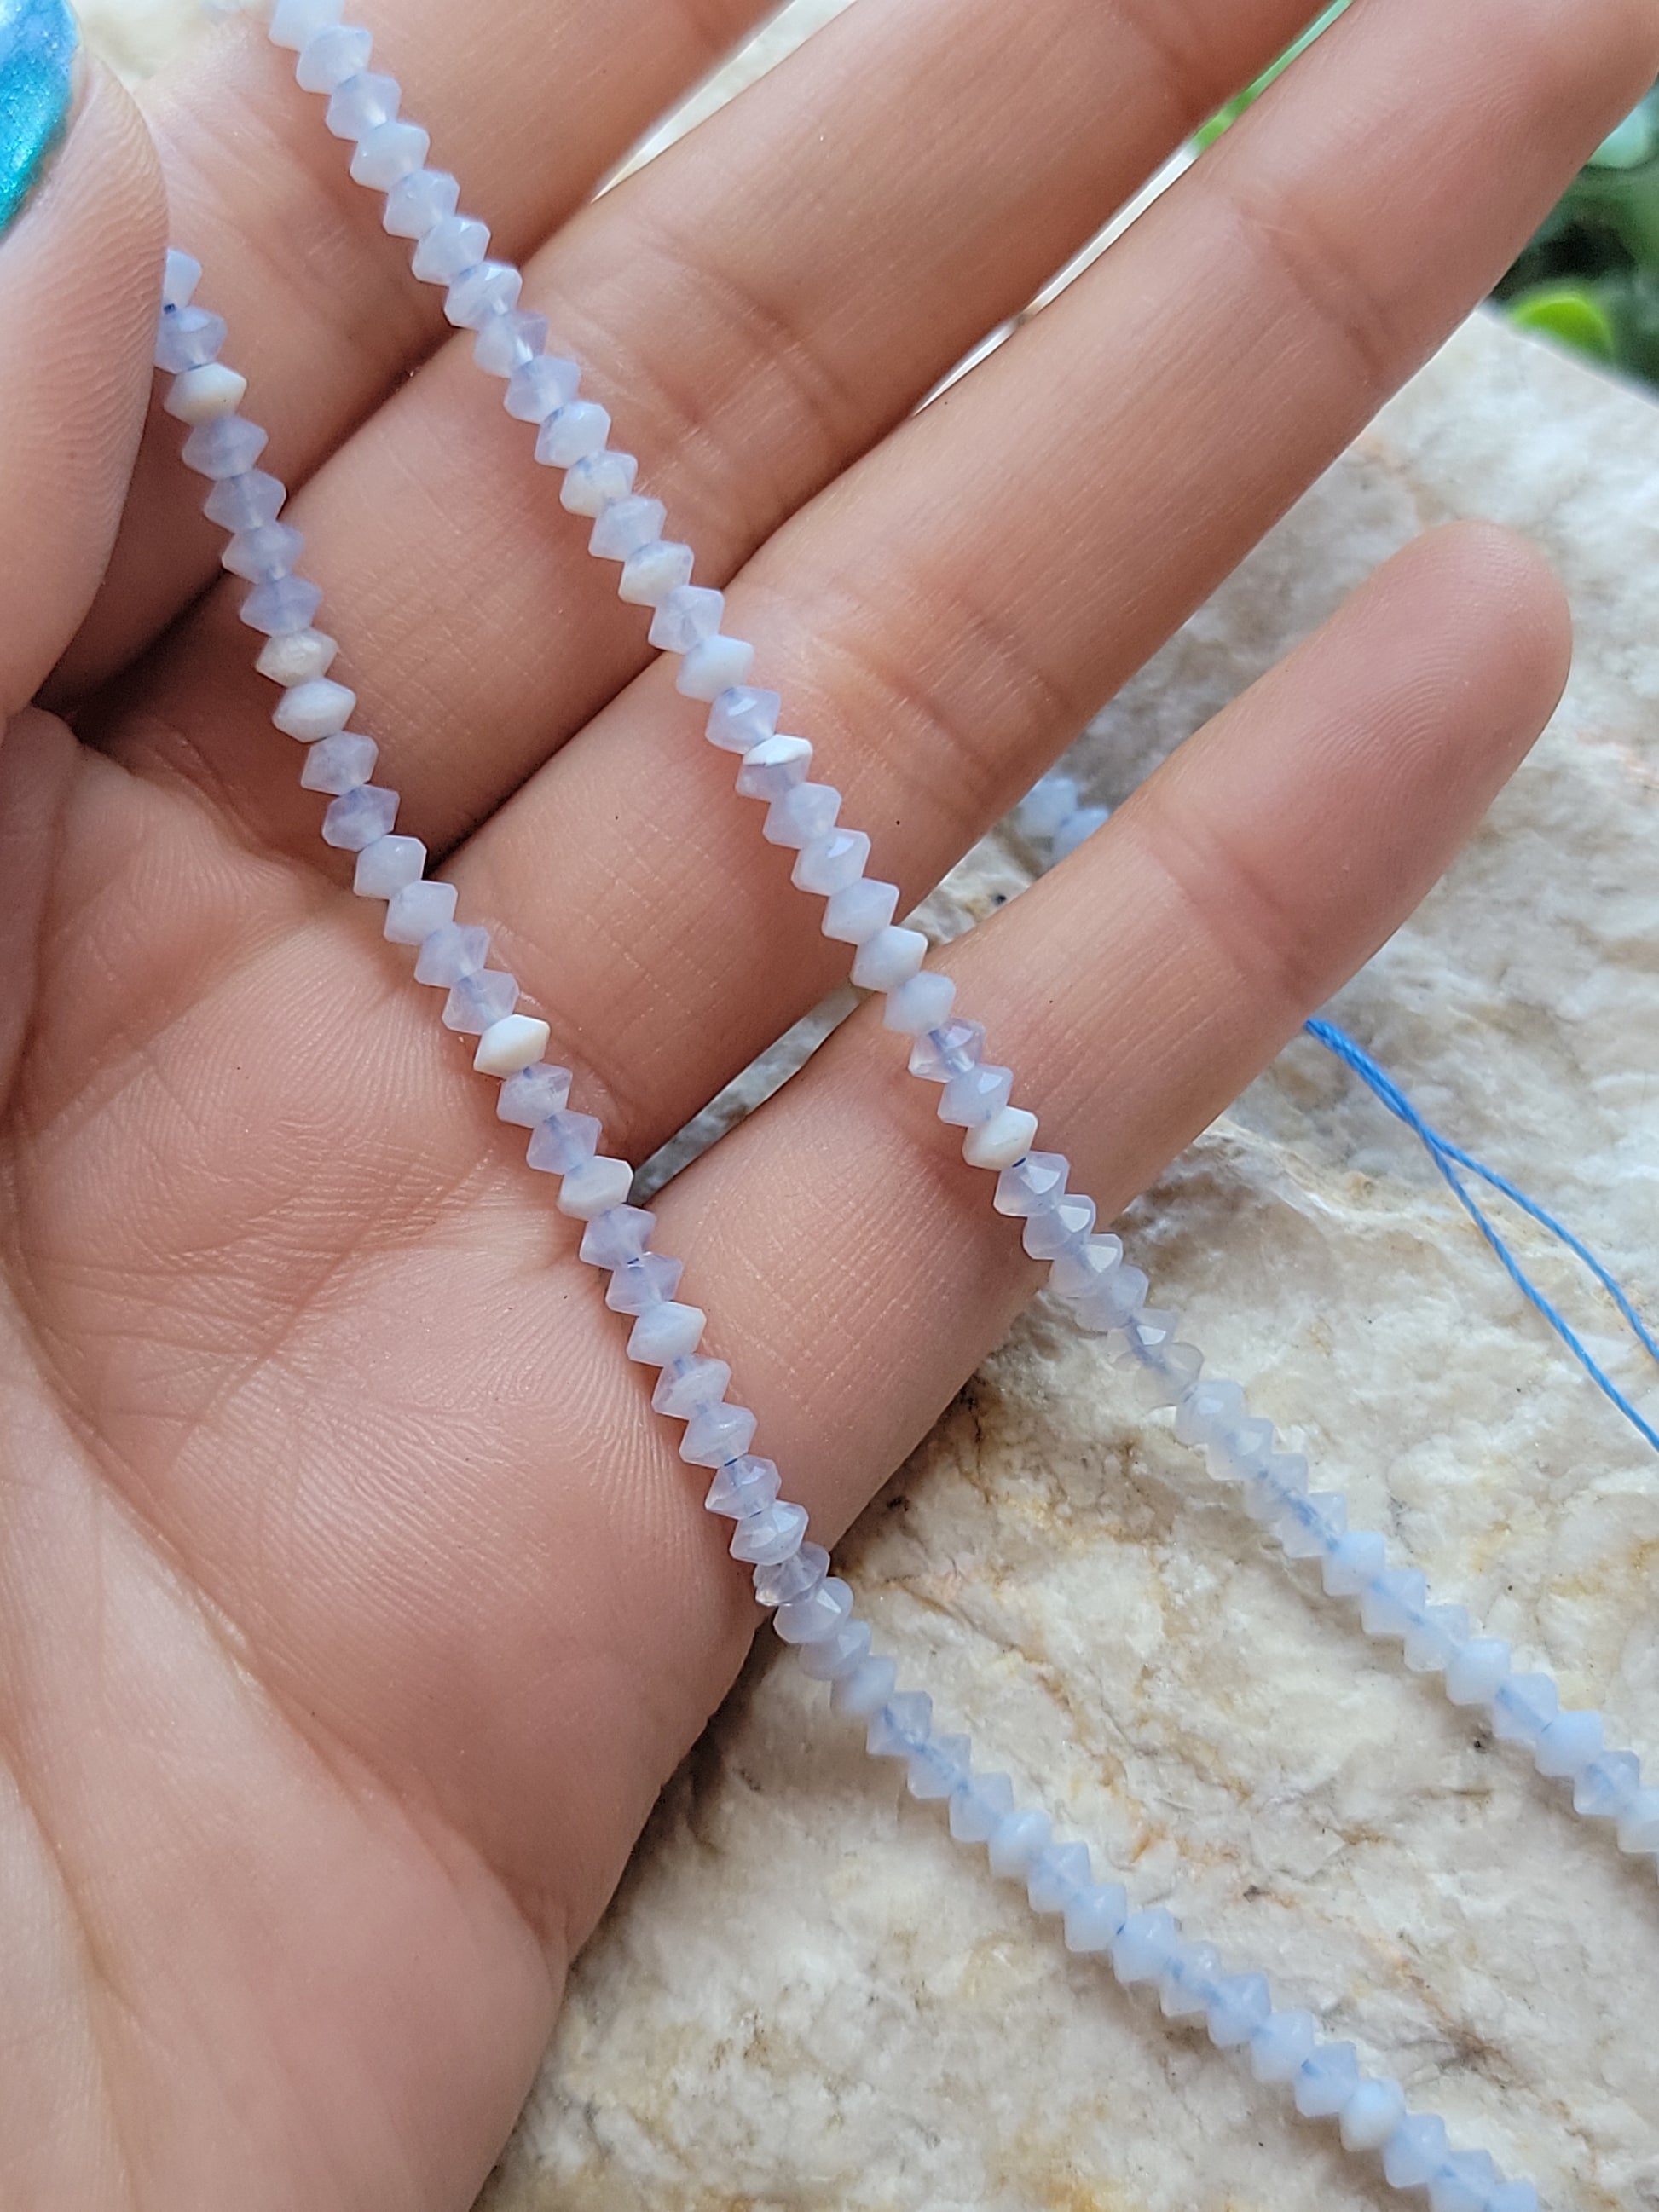 Crafting supplies such as faceted blue lace agate beads available at wholesale and retail prices, only at our crystal shop in San Diego!